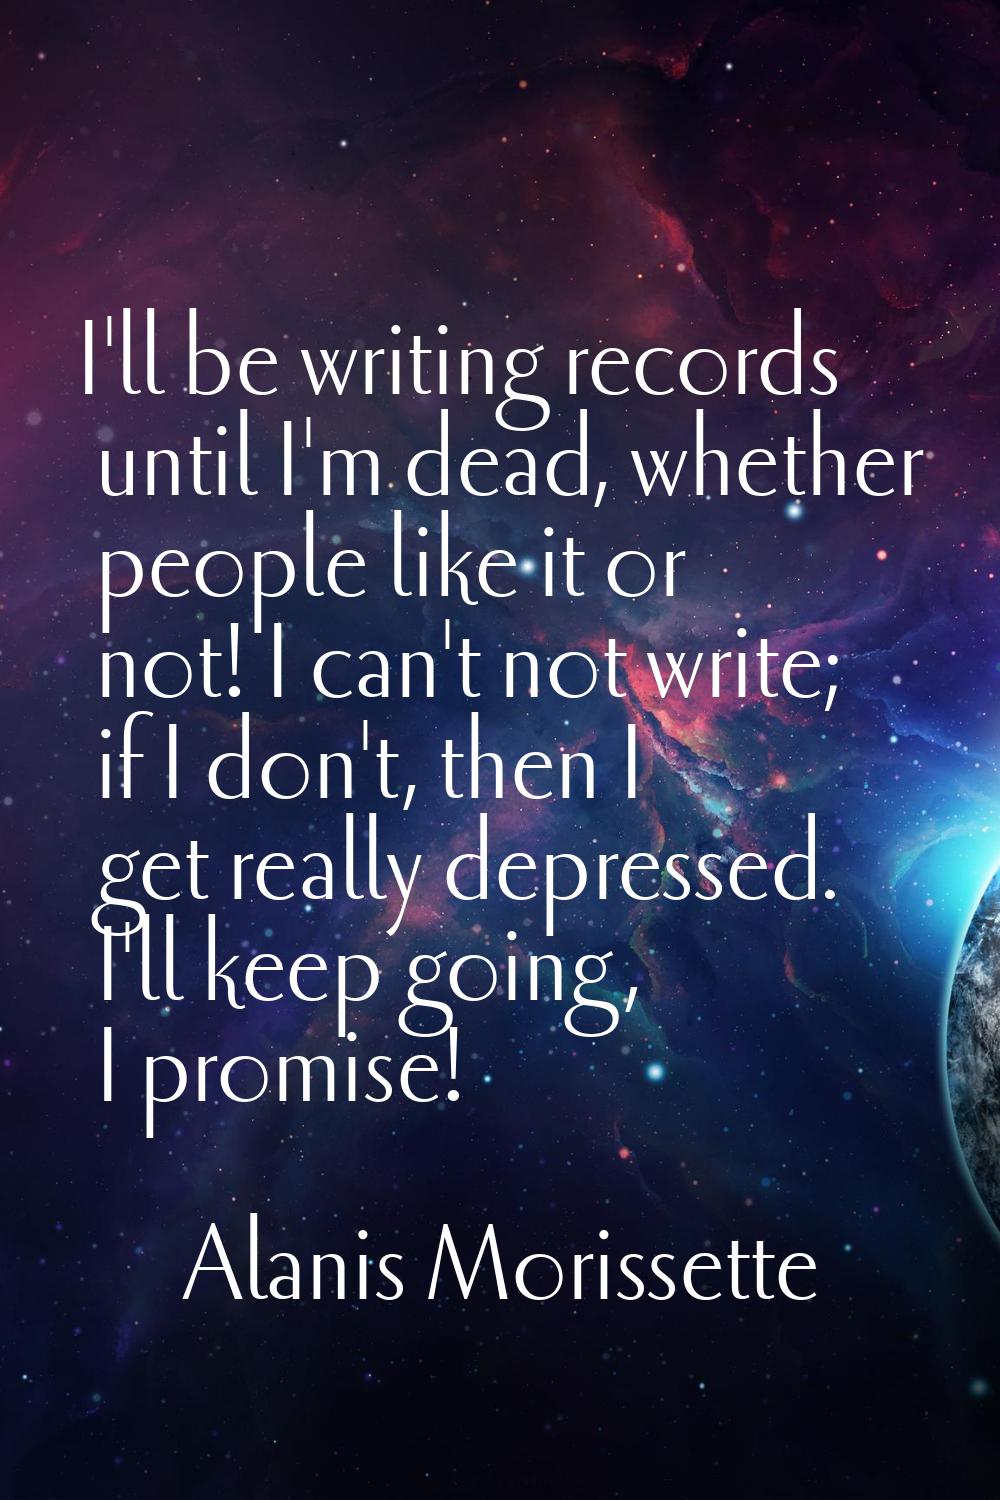 I'll be writing records until I'm dead, whether people like it or not! I can't not write; if I don'